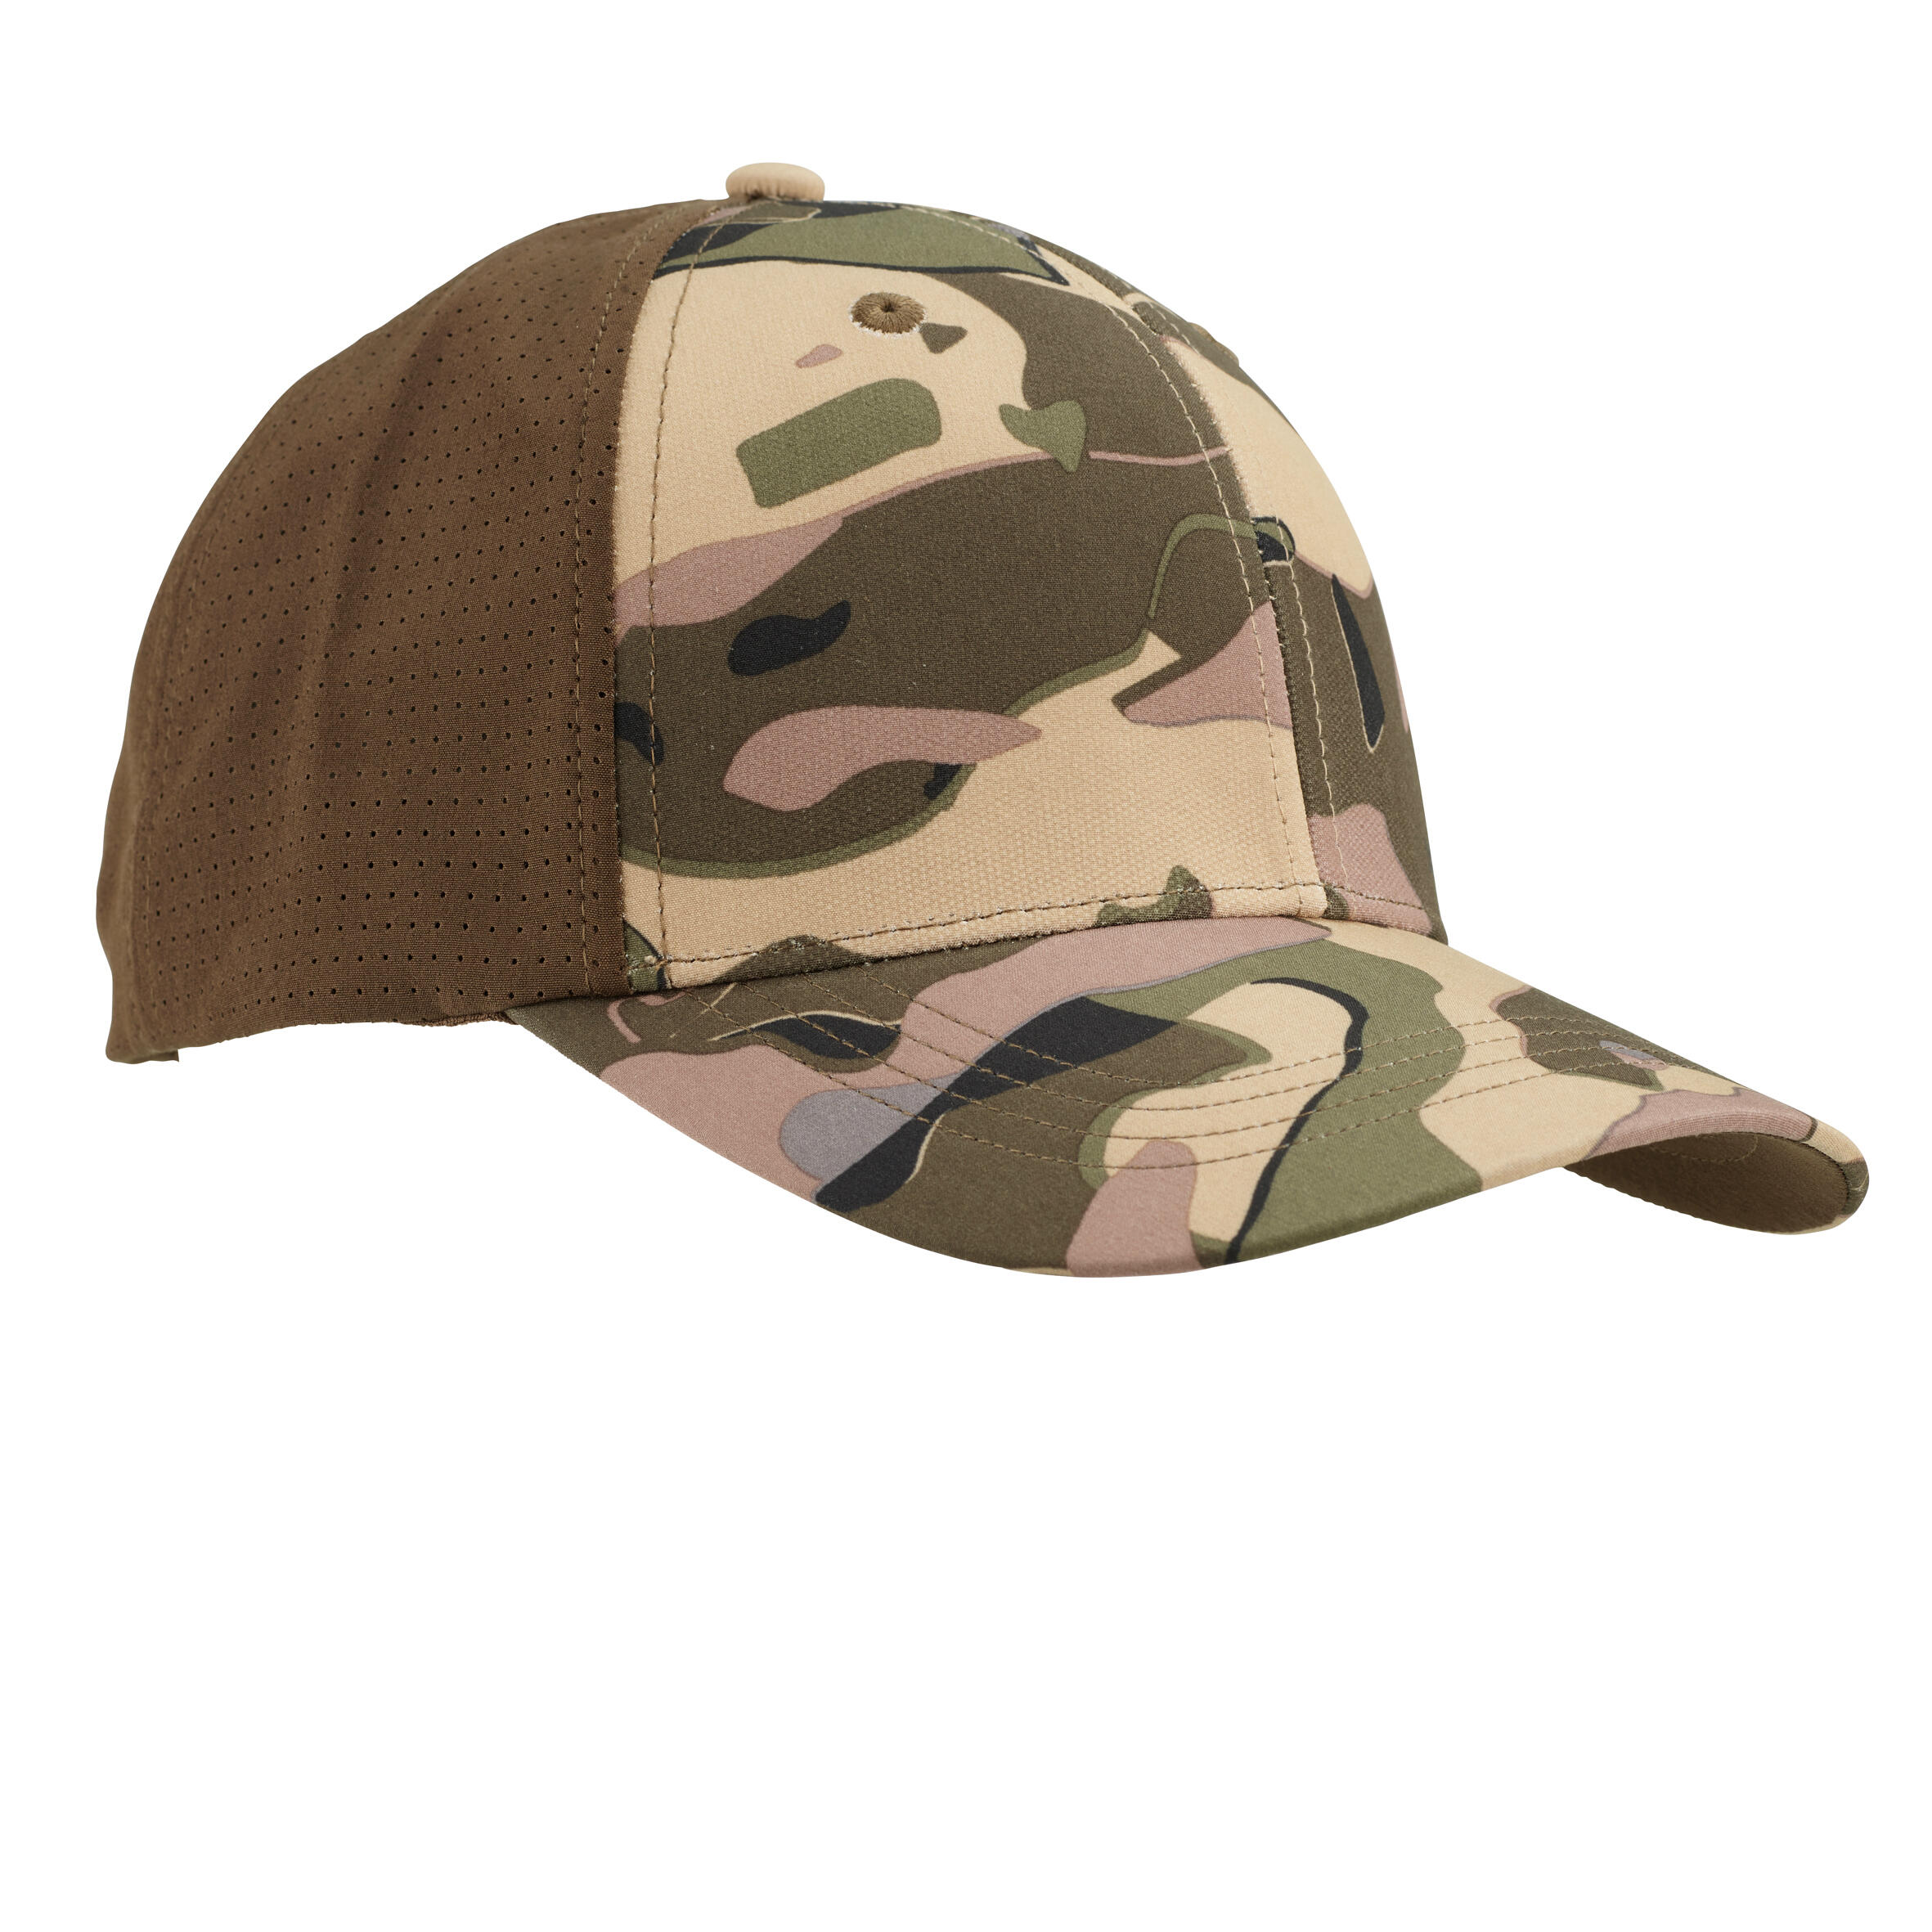 Solognac Lightweight And Breathable Hunting Cap 520 Camo Brown & Uni